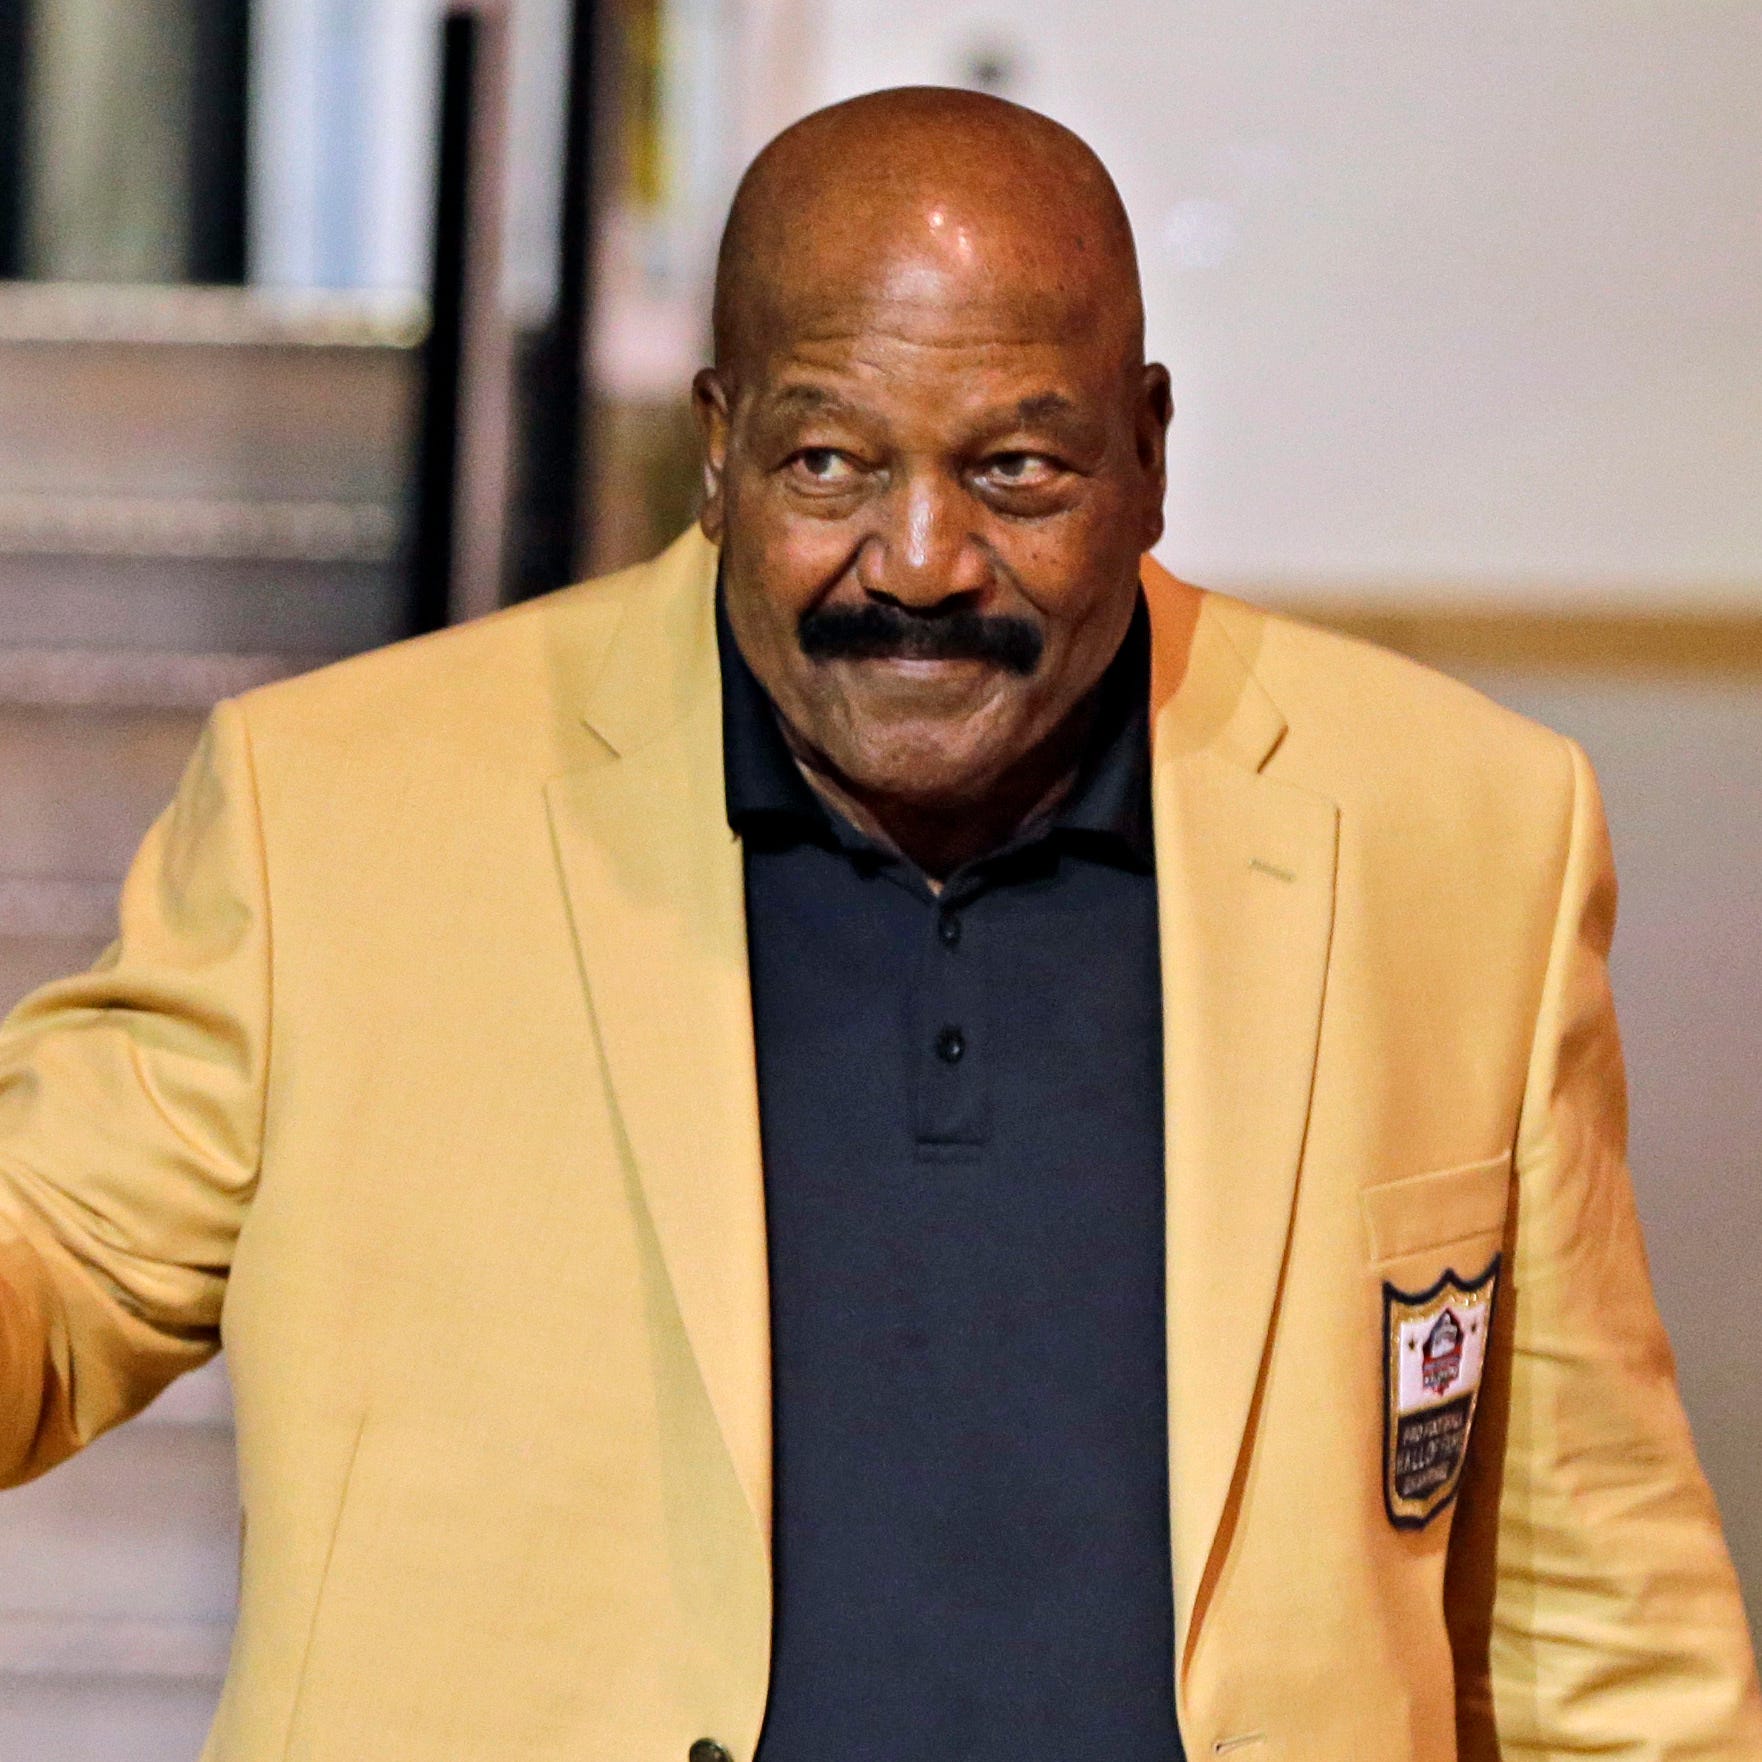 FILE - Jim Brown is introduced before the inaugural Pro Football Hall of Fame Fan Fest Friday, May 2, 2014, at the International Exposition Center in Cleveland. NFL legend, actor and social activist Jim Brown passed away peacefully in his Los Angeles home on Thursday night, May 18, 2023, with his wife, Monique, by his side, according to a spokeswoman for Brown's family. He was 87. (AP Photo/Mark Duncan, File) ORG XMIT: NYDD210